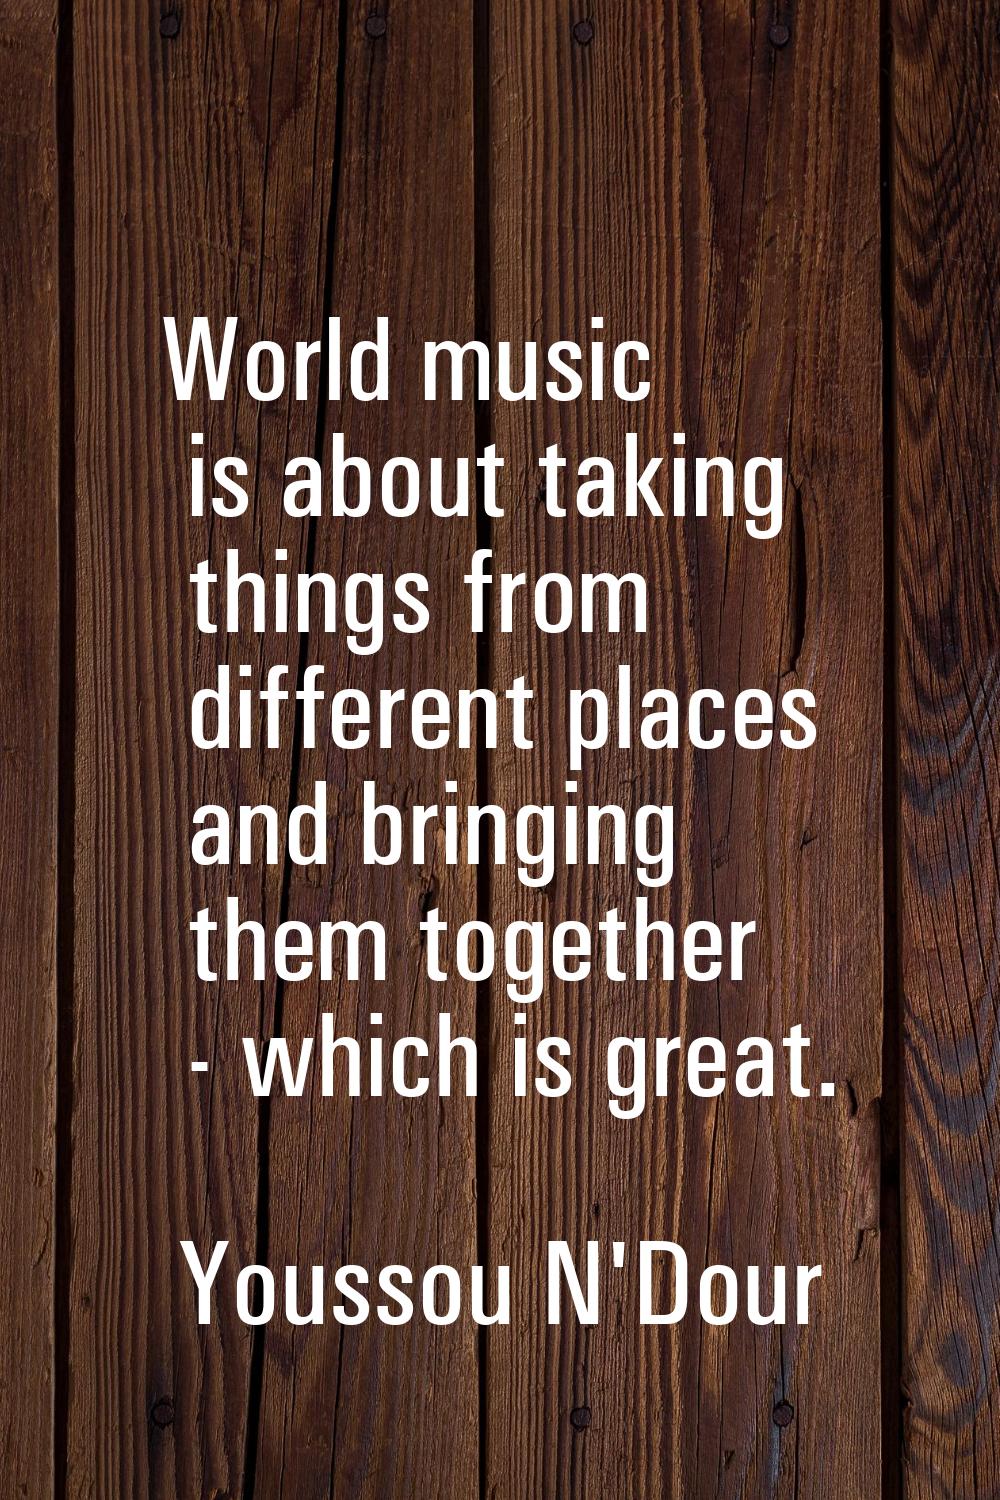 World music is about taking things from different places and bringing them together - which is grea